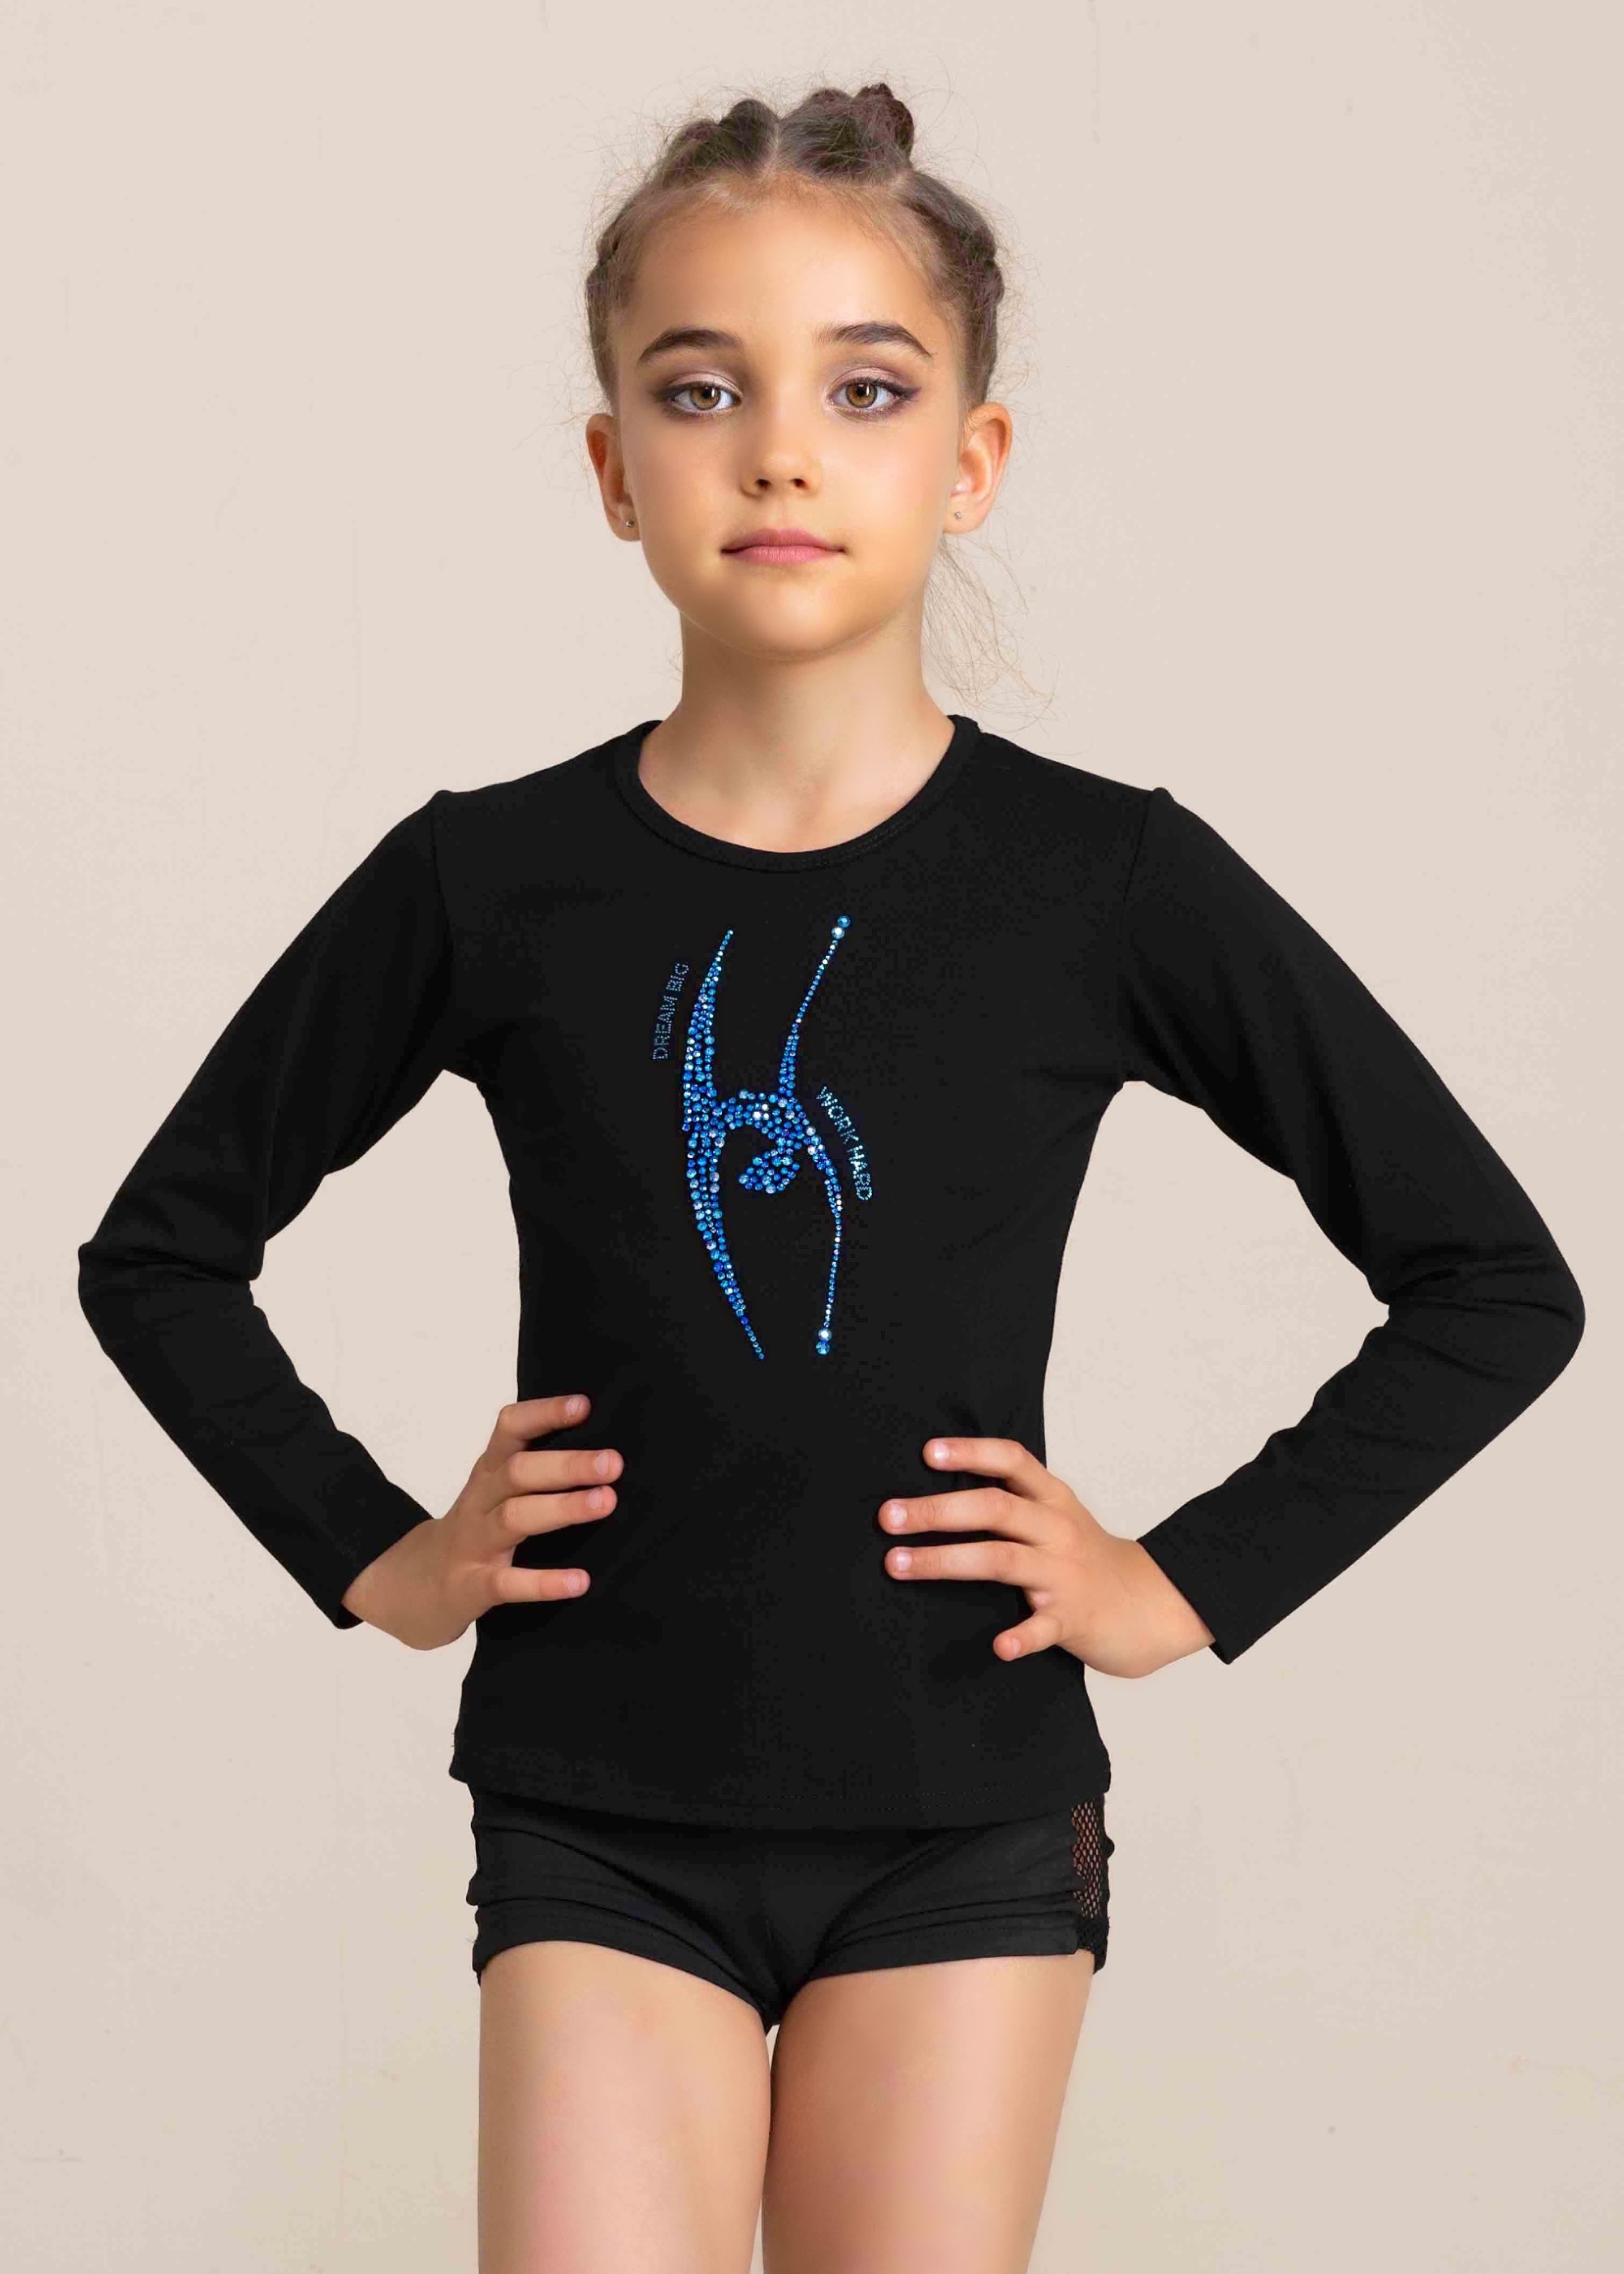 PAMELA T-shirt, gymnast with a clubs by Grand Prix